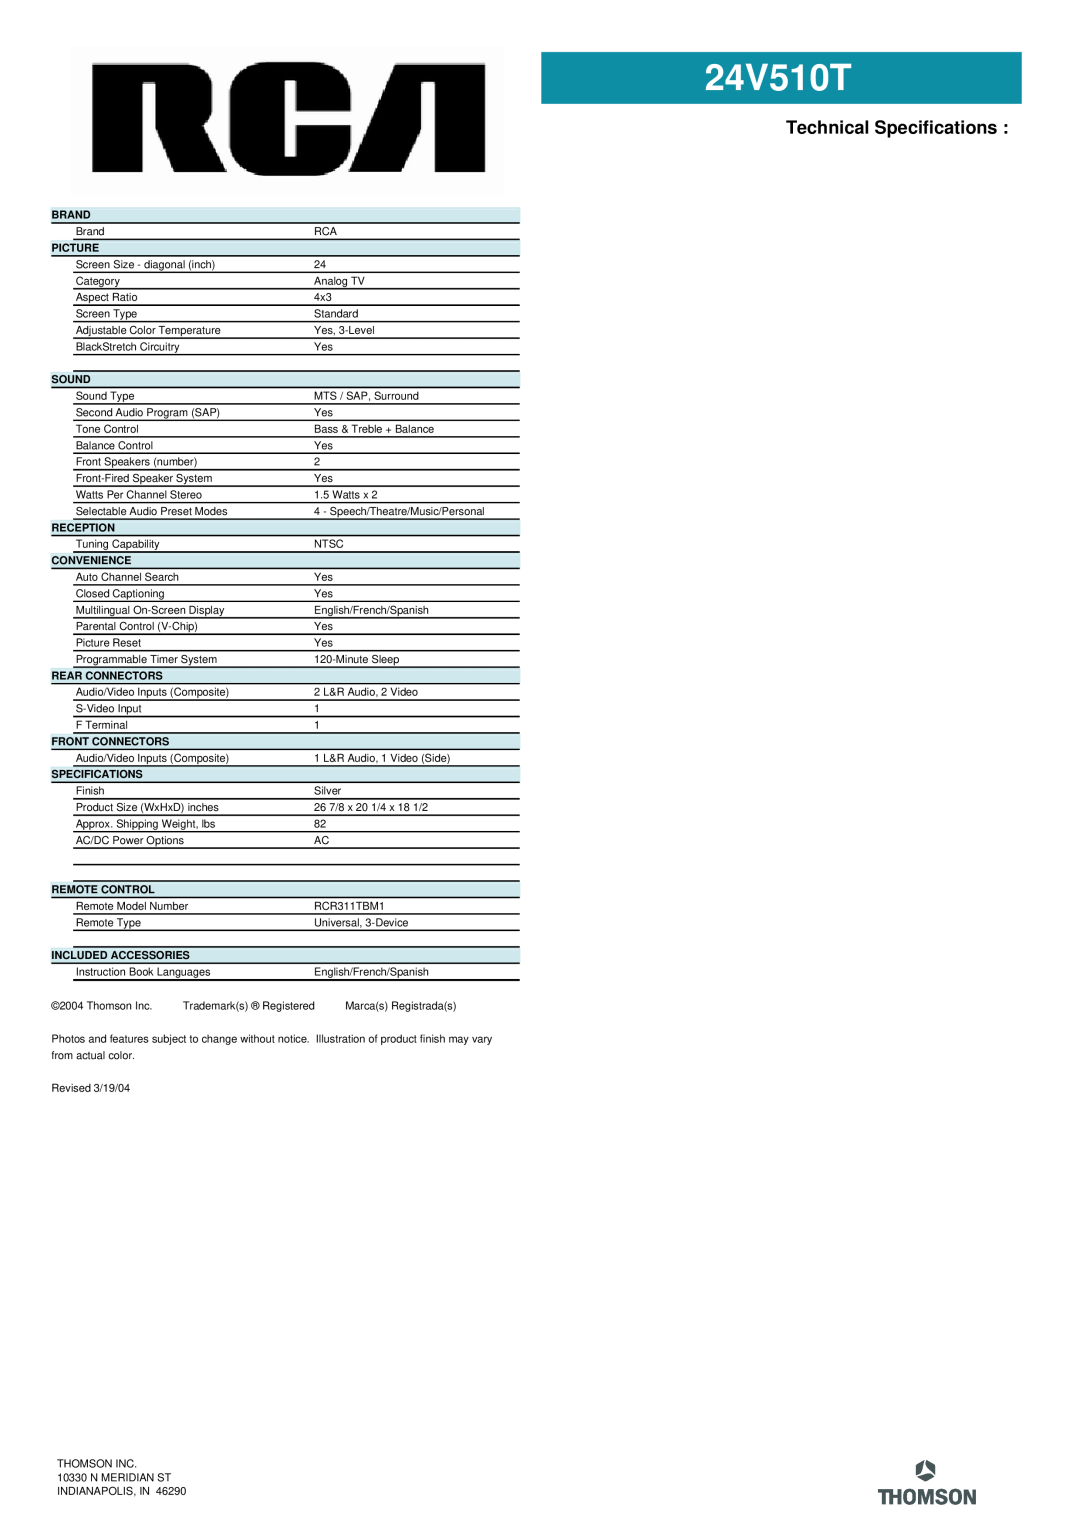 RCA 24V510T manual Technical Specifications 